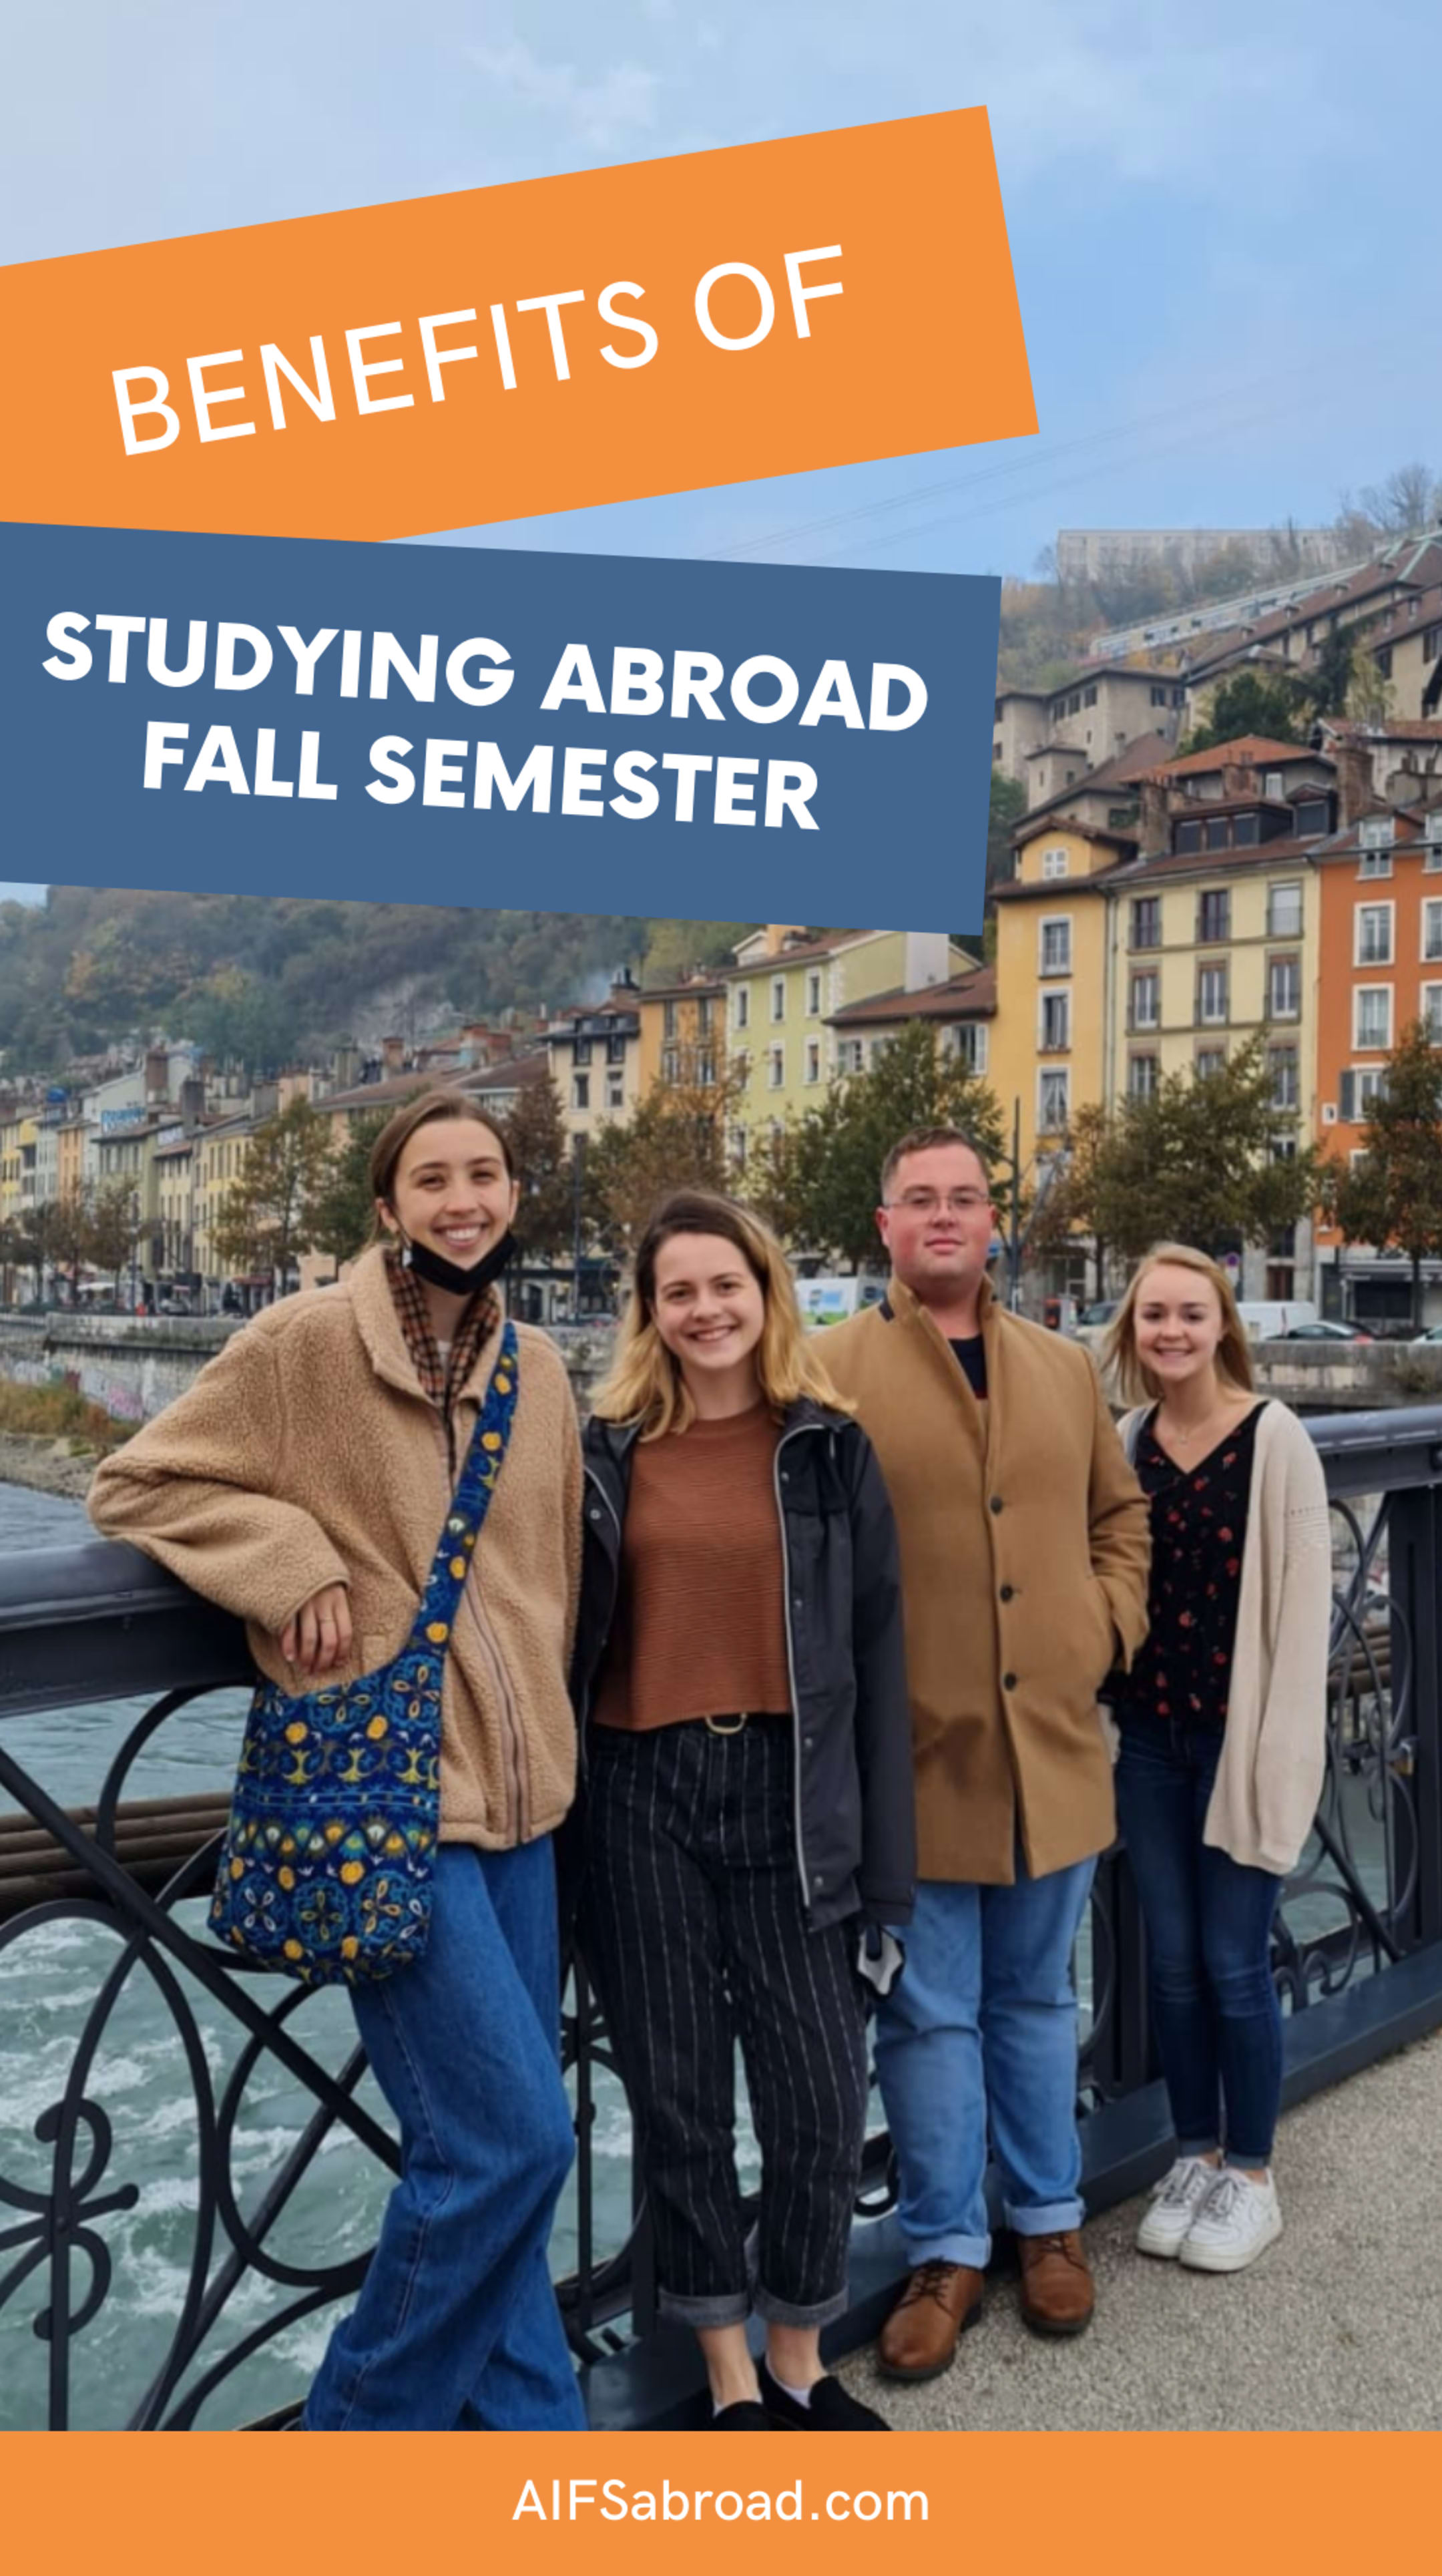 How to Start a Blog for Your Study Abroad Semester